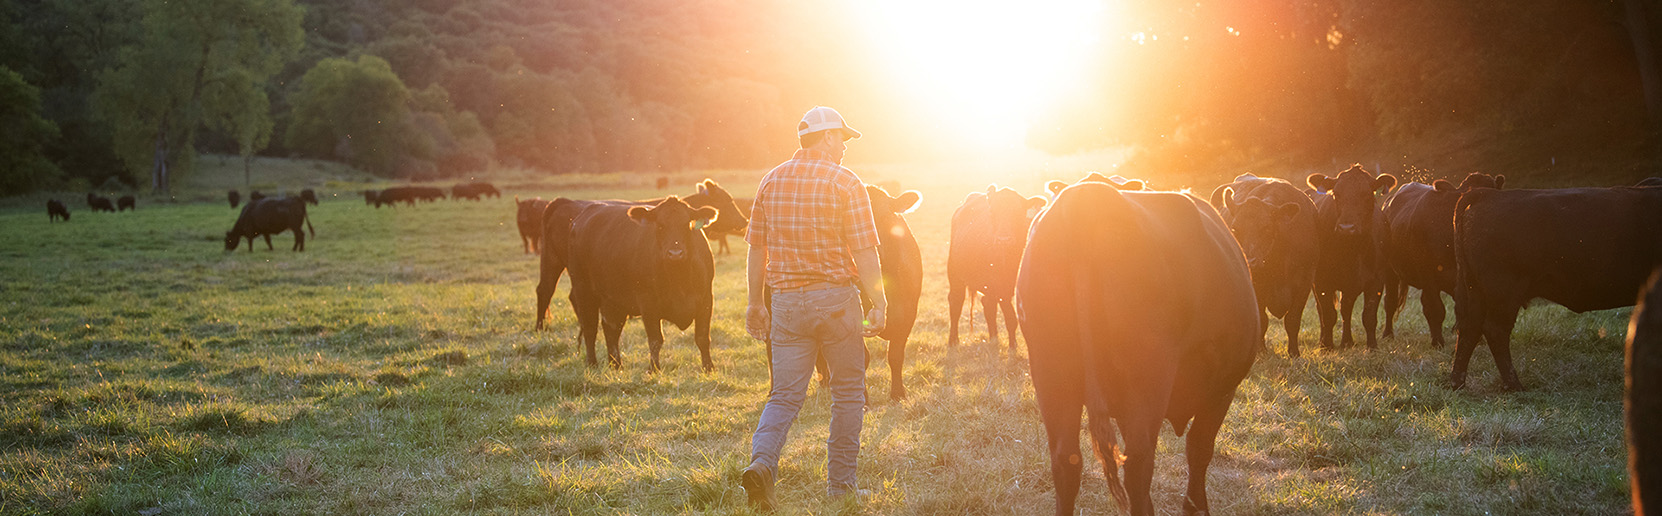 Livestock operator walking with cattle herd at sunset - Zoetis